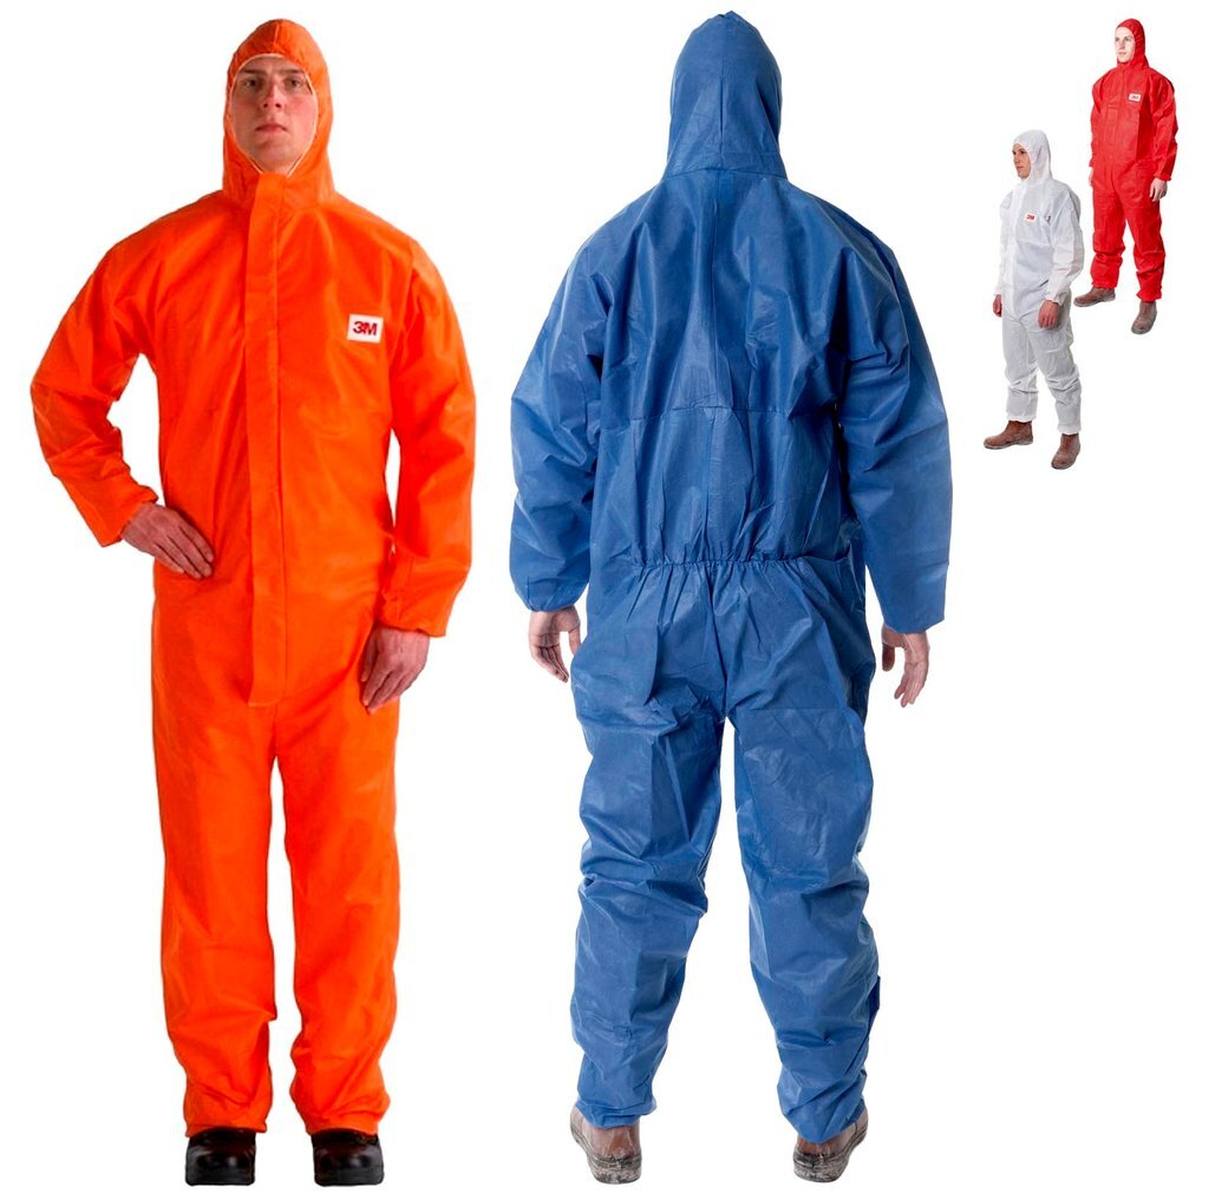 3M 4515O Protective coverall, orange, TYPE 5/6, size 4XL, material SMMS low-lint, elastic band finish